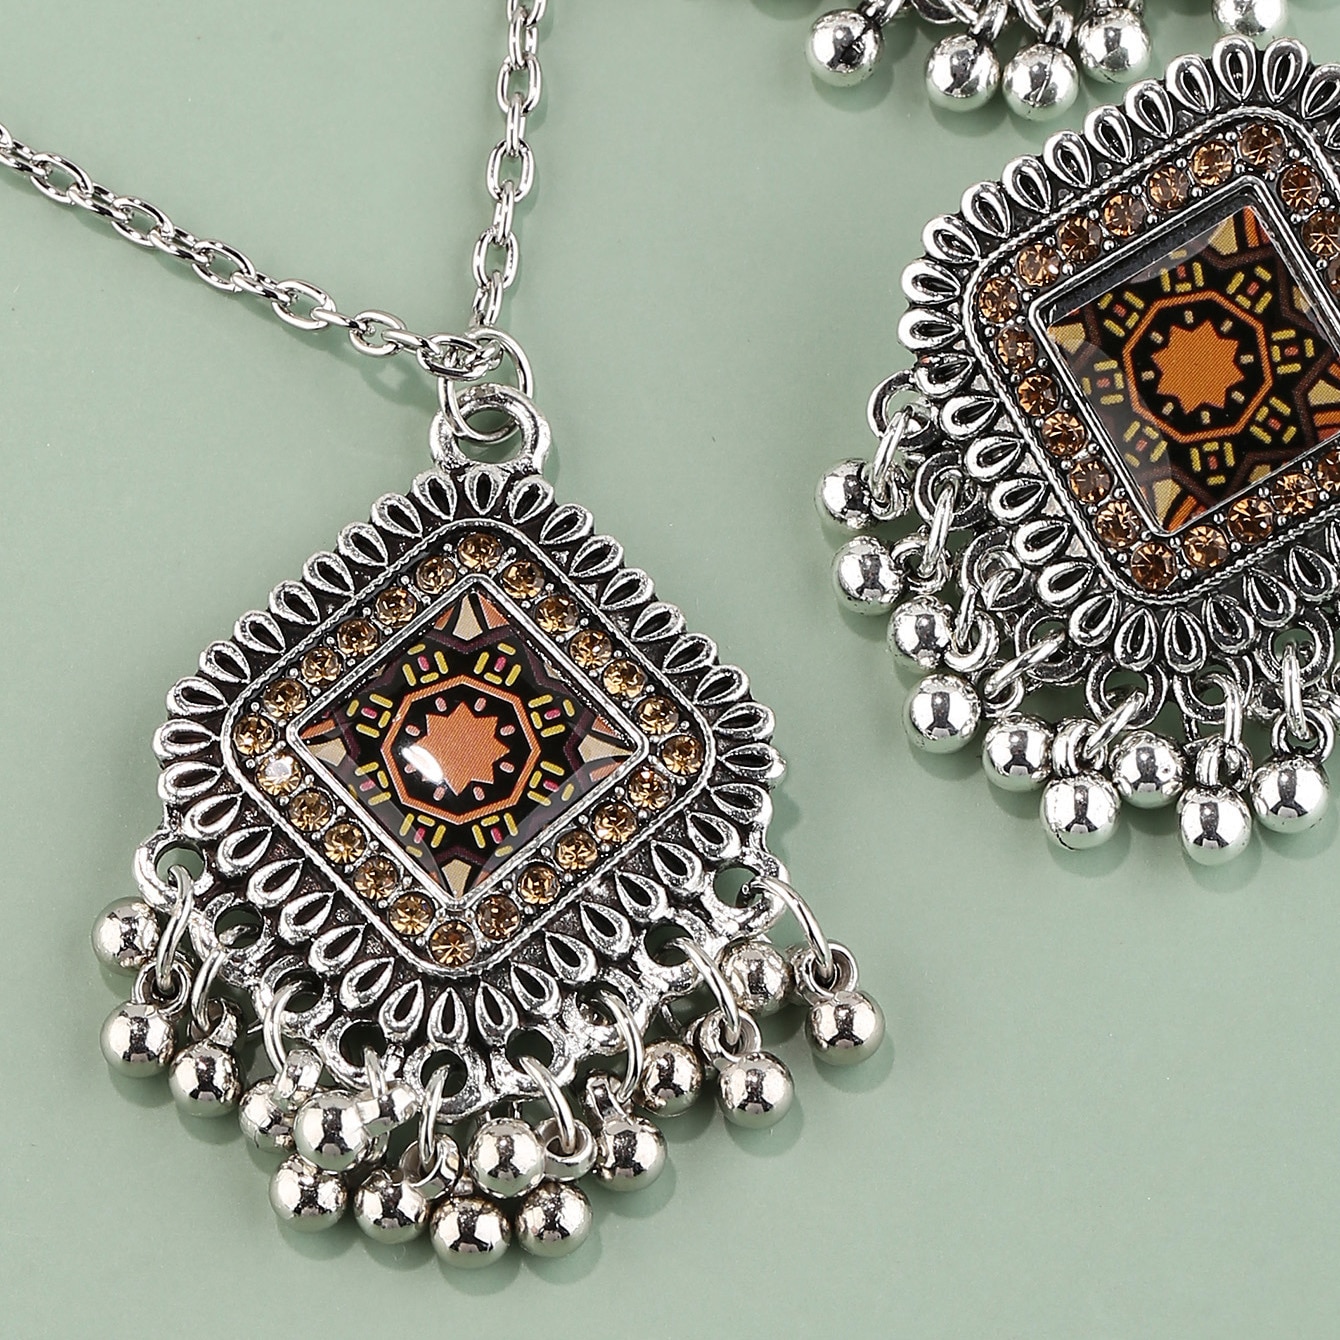 Vintage-Silver-Color-Flower-Jewelry-Sets-For-Women-Bell-Tassel-Necklaces-Earring-Bridal-Afghan-India-1005004536452730-4